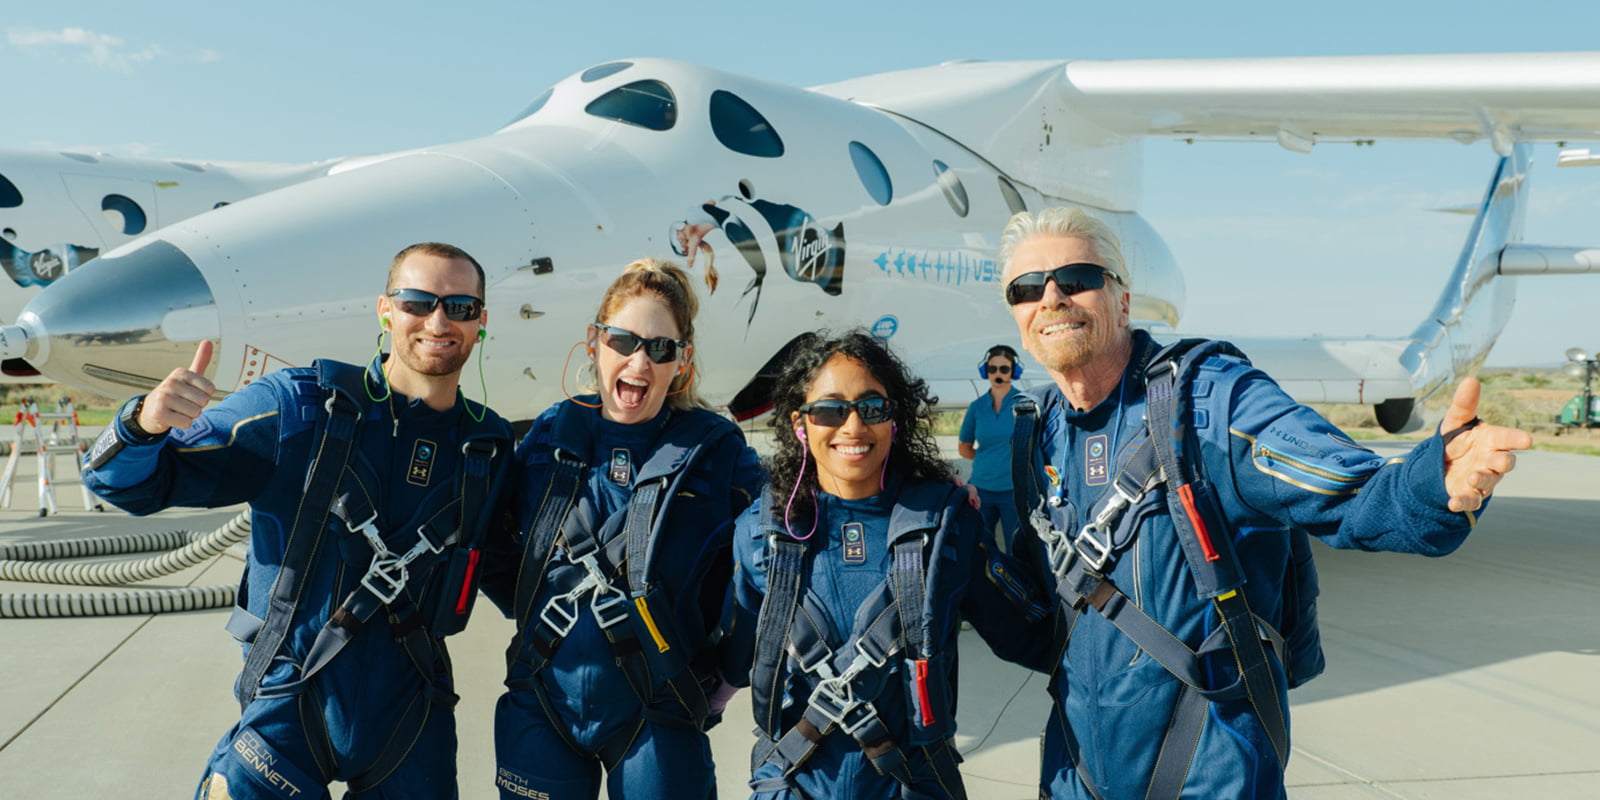 Virgin Galactic Launches Billionaire Richard Branson To Space In A Historic Space Flight With Crew